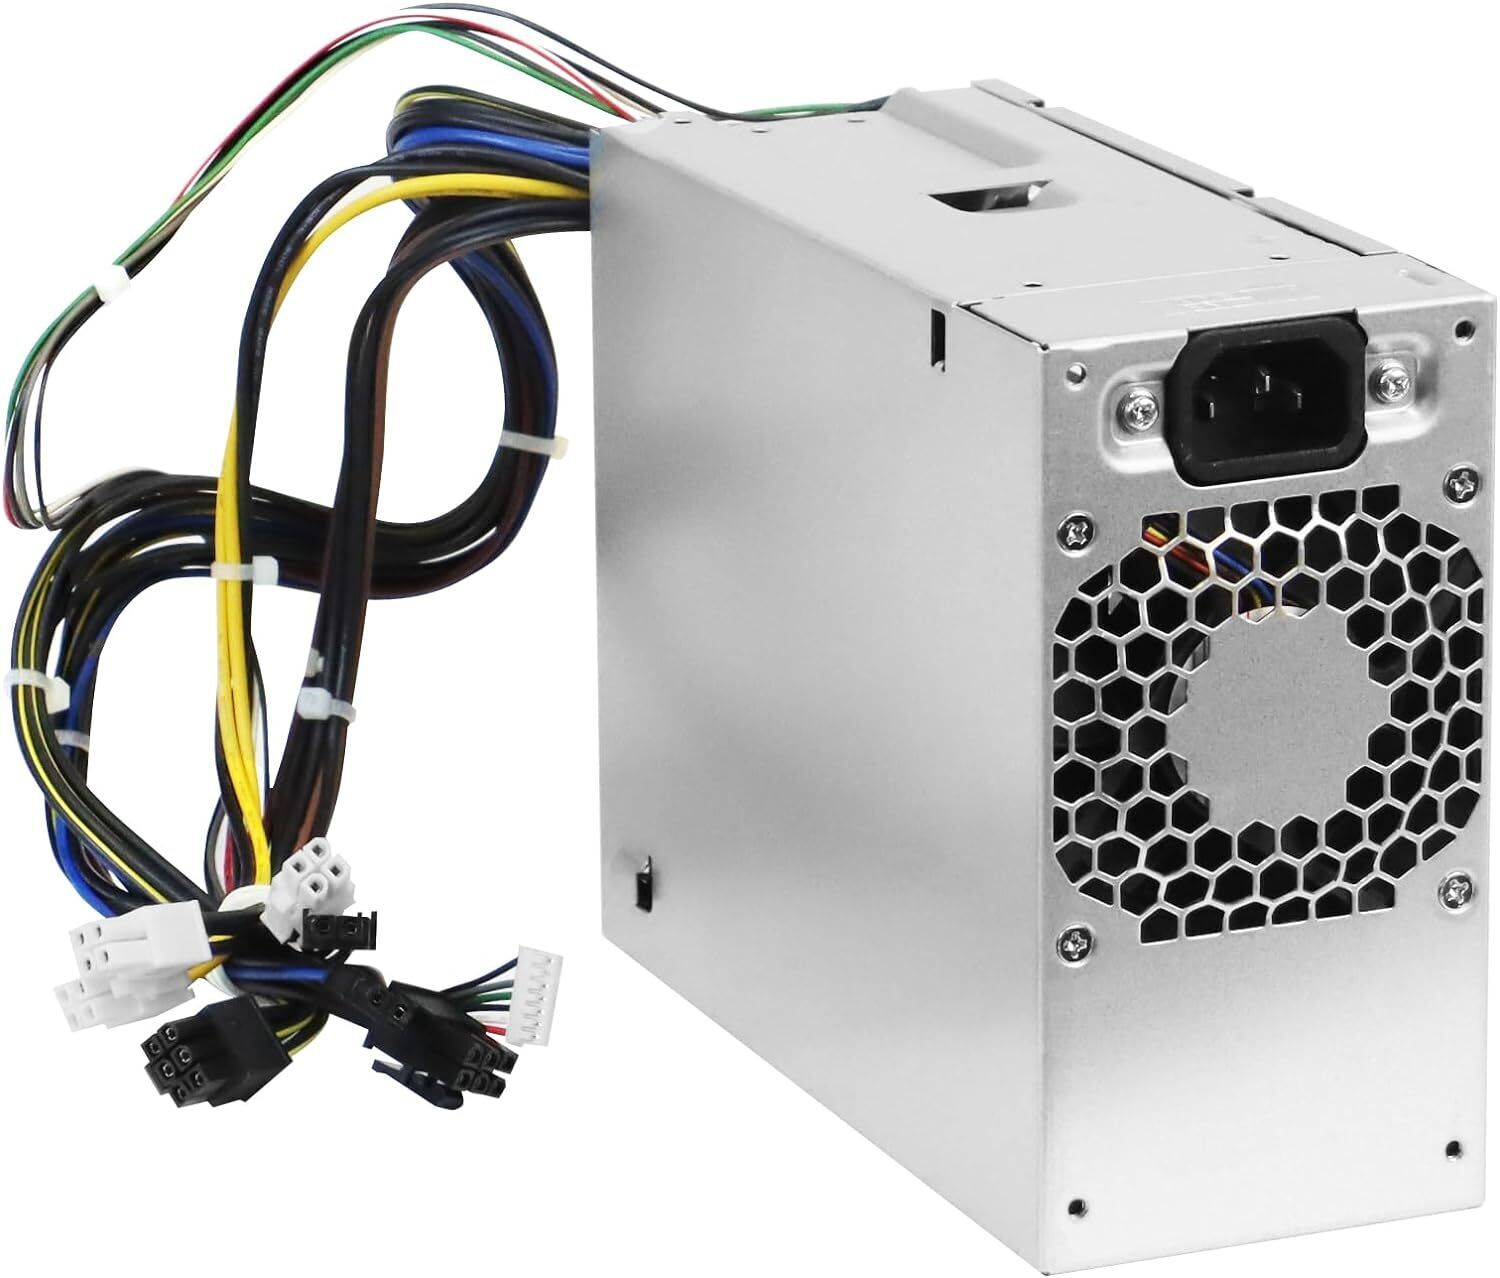 New For HP Z2 G4 Minitower 650W Power Supply DPS-650AB-30A L36049-003 L57253-003